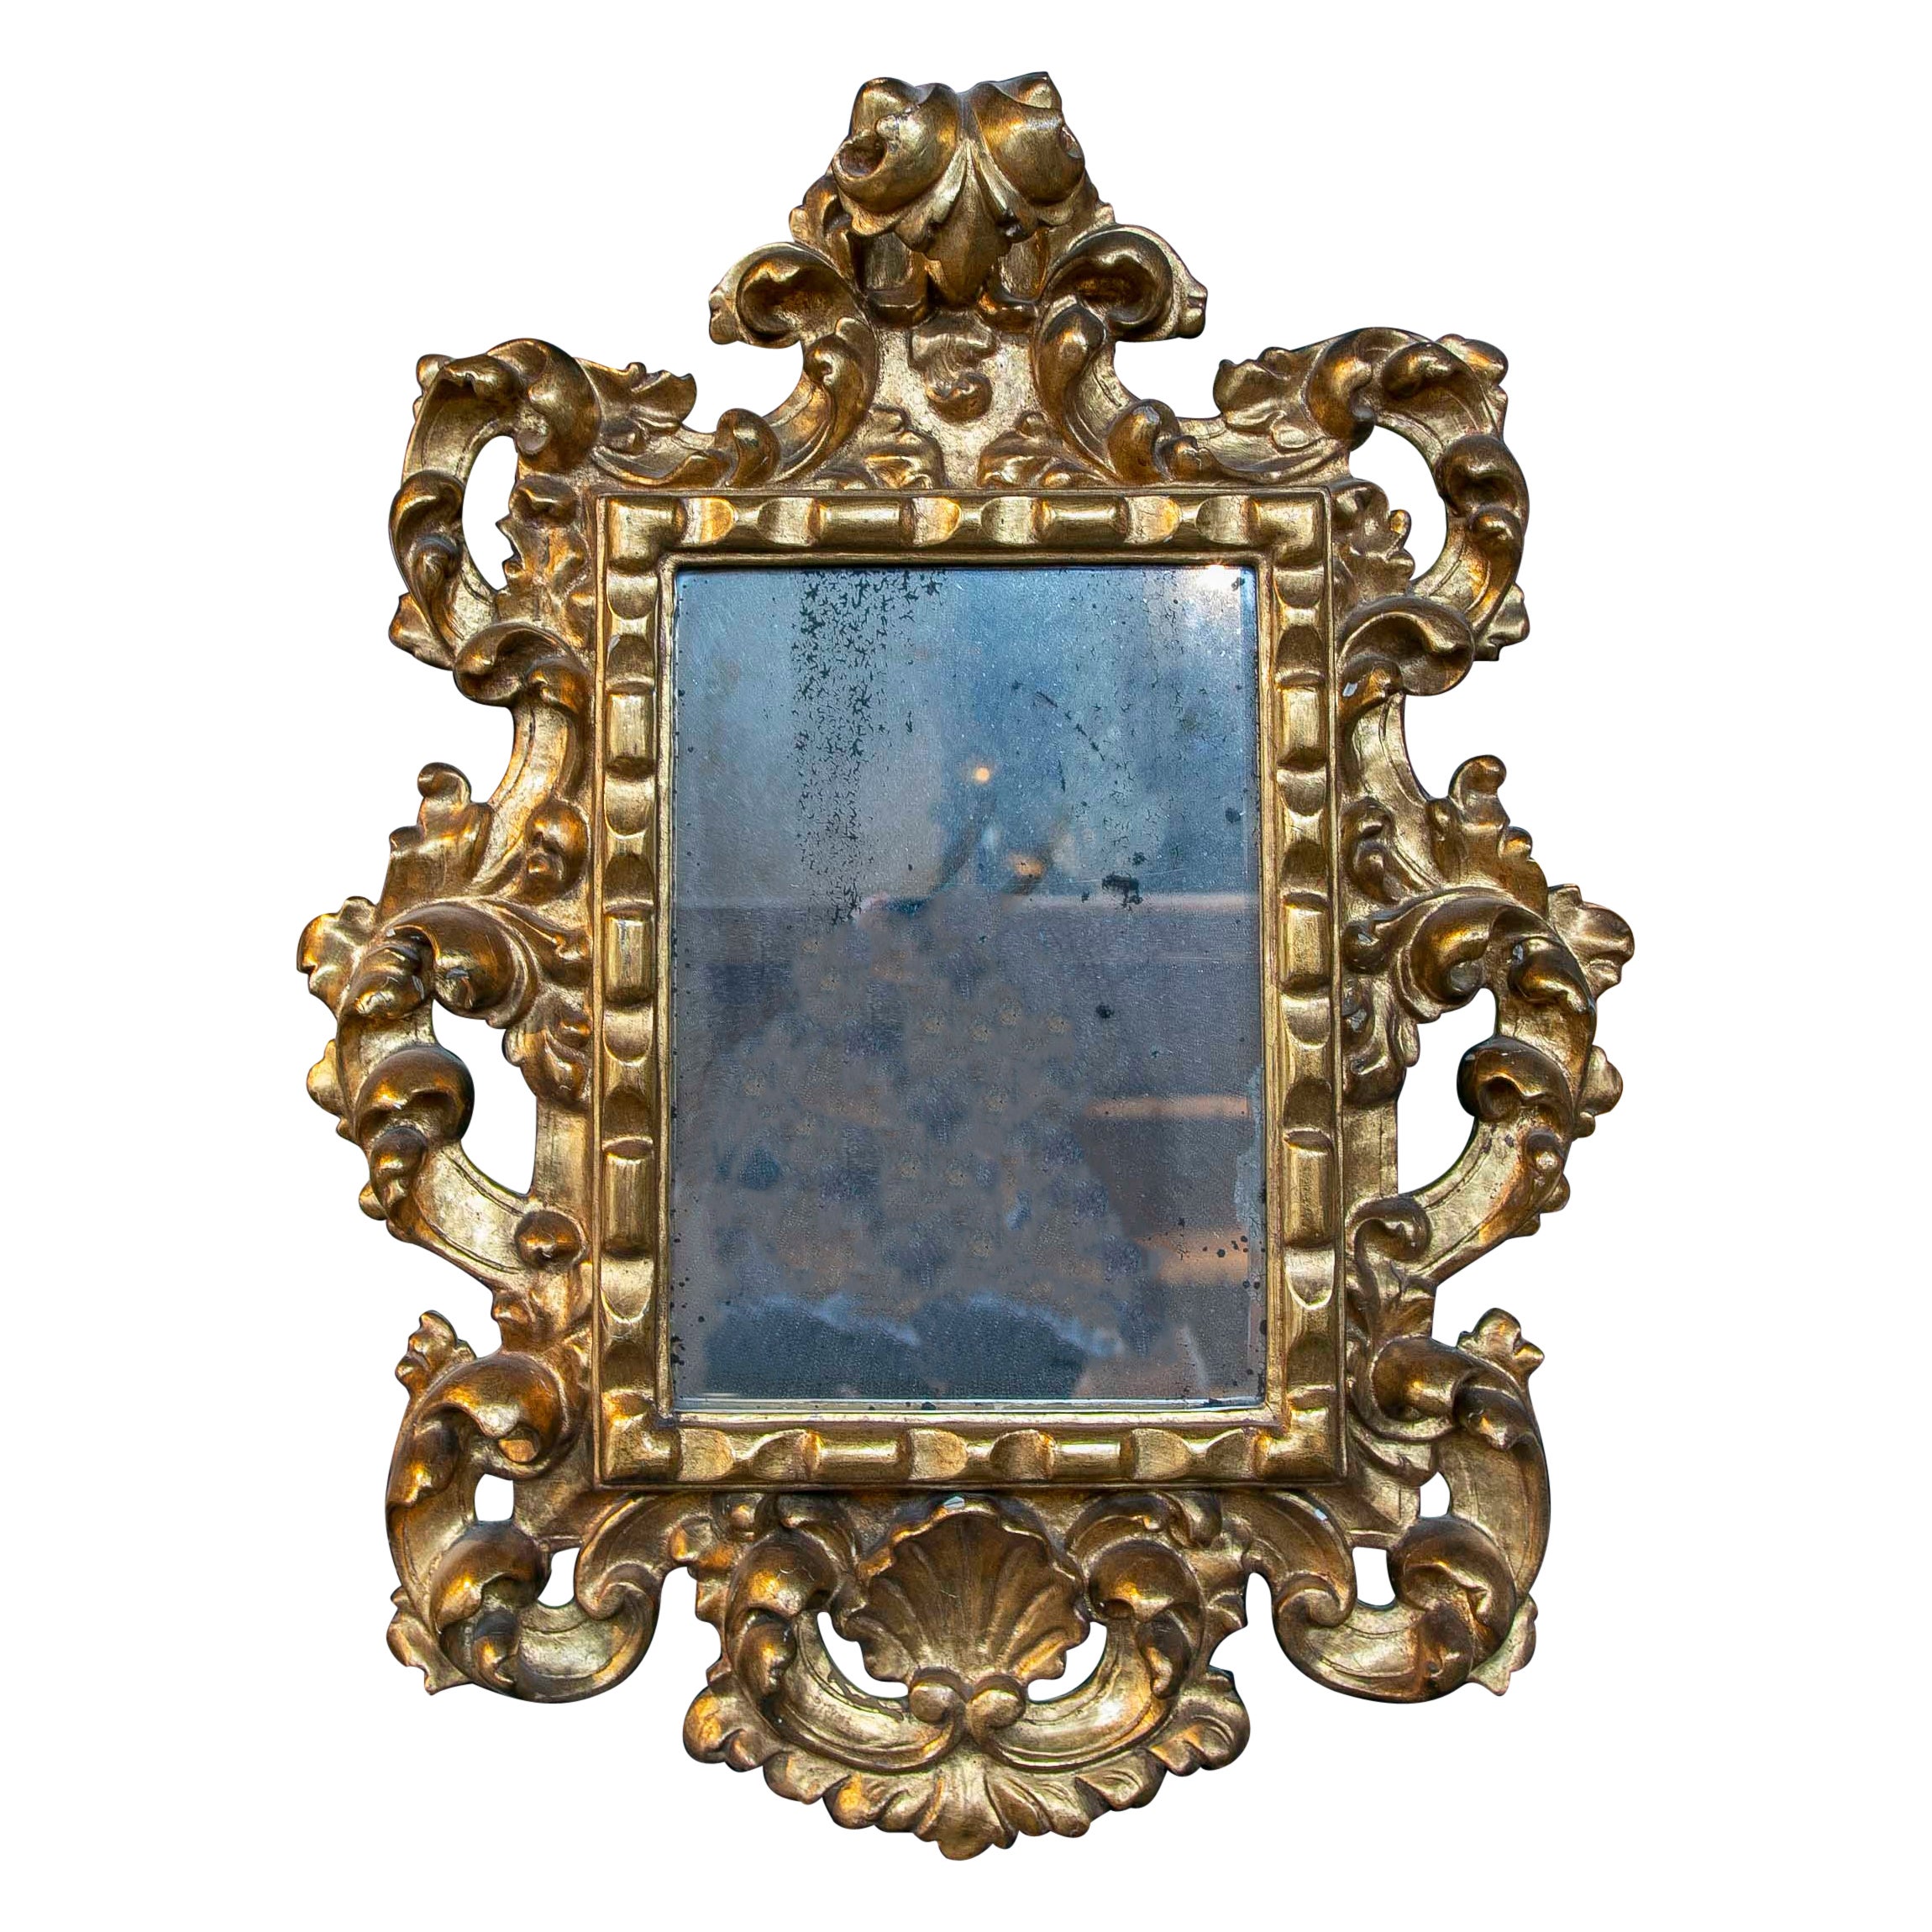 1950s Spanish Wooden Mirror Gilded with Decoration of Rocks and Shells